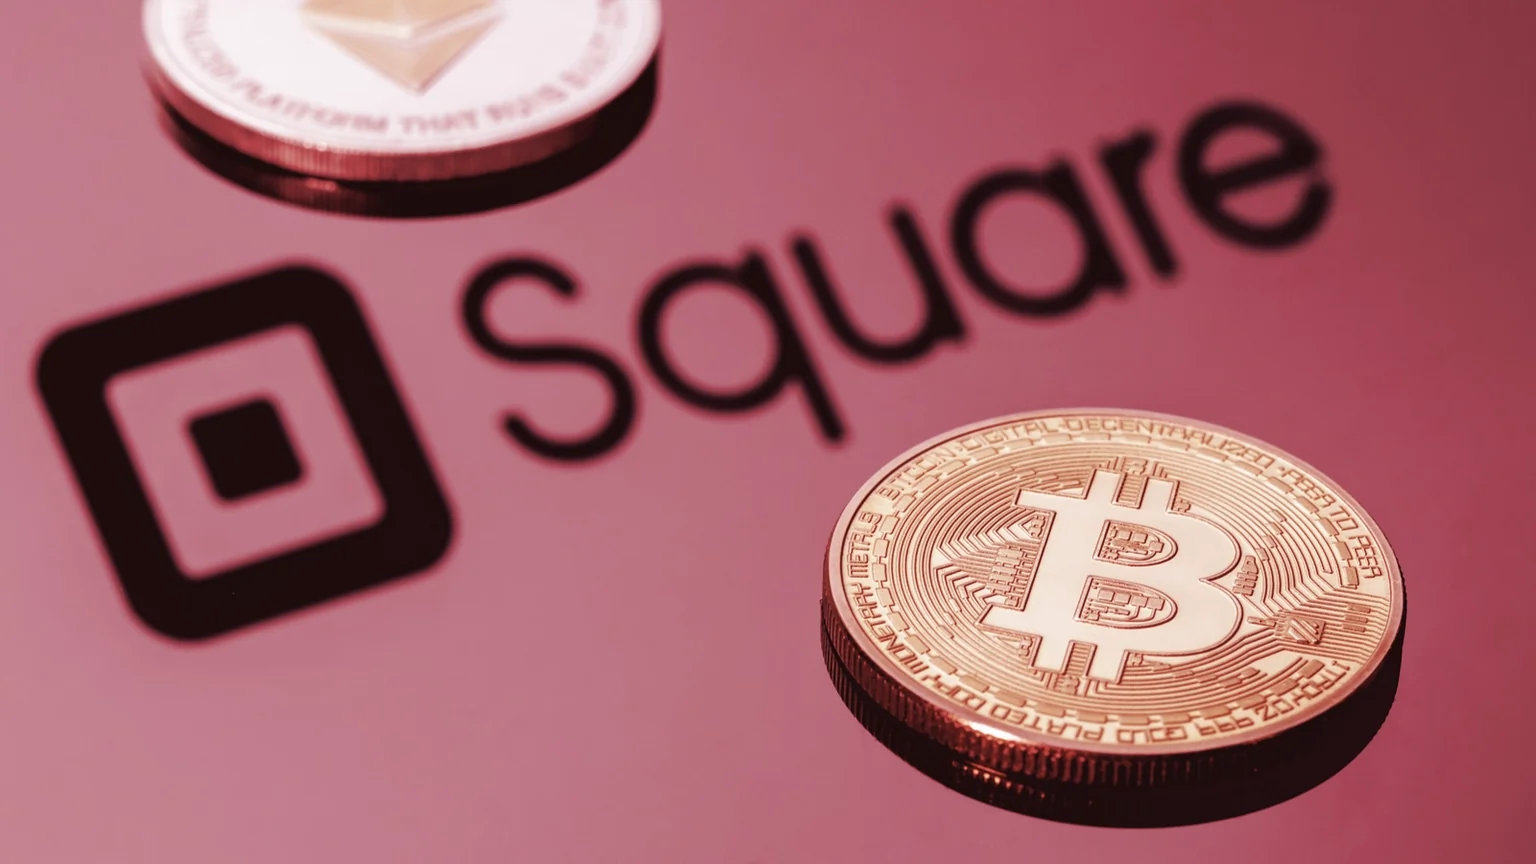 Square and Bitcoin. Image: Shutterstock